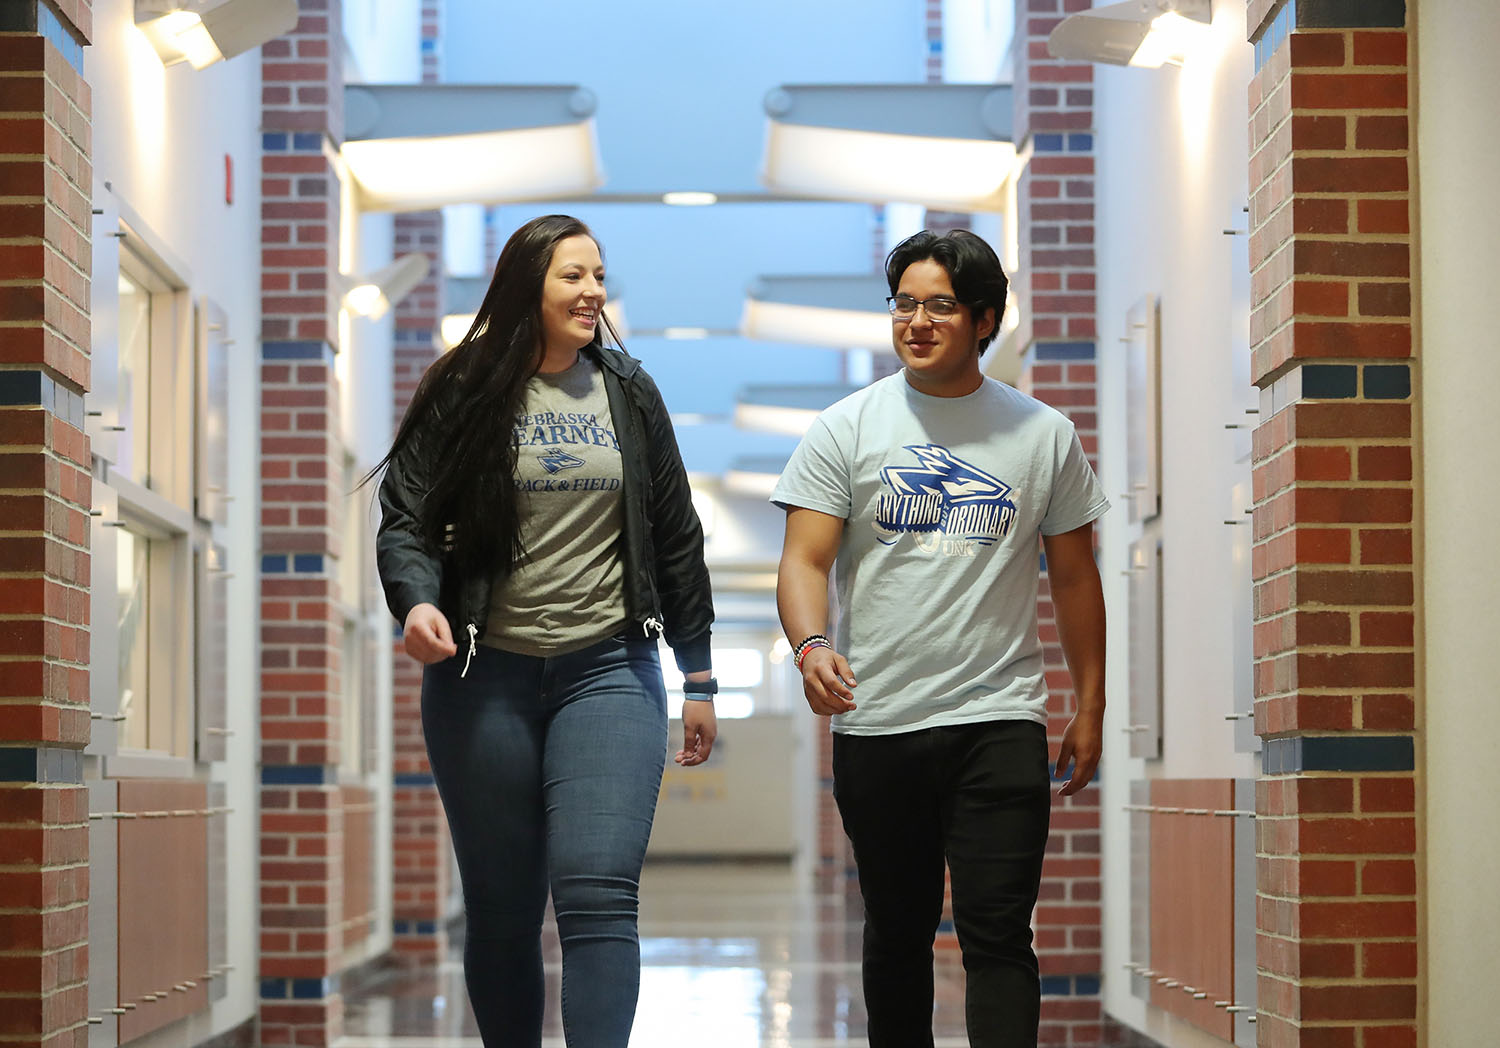 Logan Prater of Colorado Springs, Colorado, and Daniel Ocampo of Omaha both decided to attend UNK because of the financial assistance they receive through scholarships. (Photo by Corbey R. Dorsey, UNK Communications)